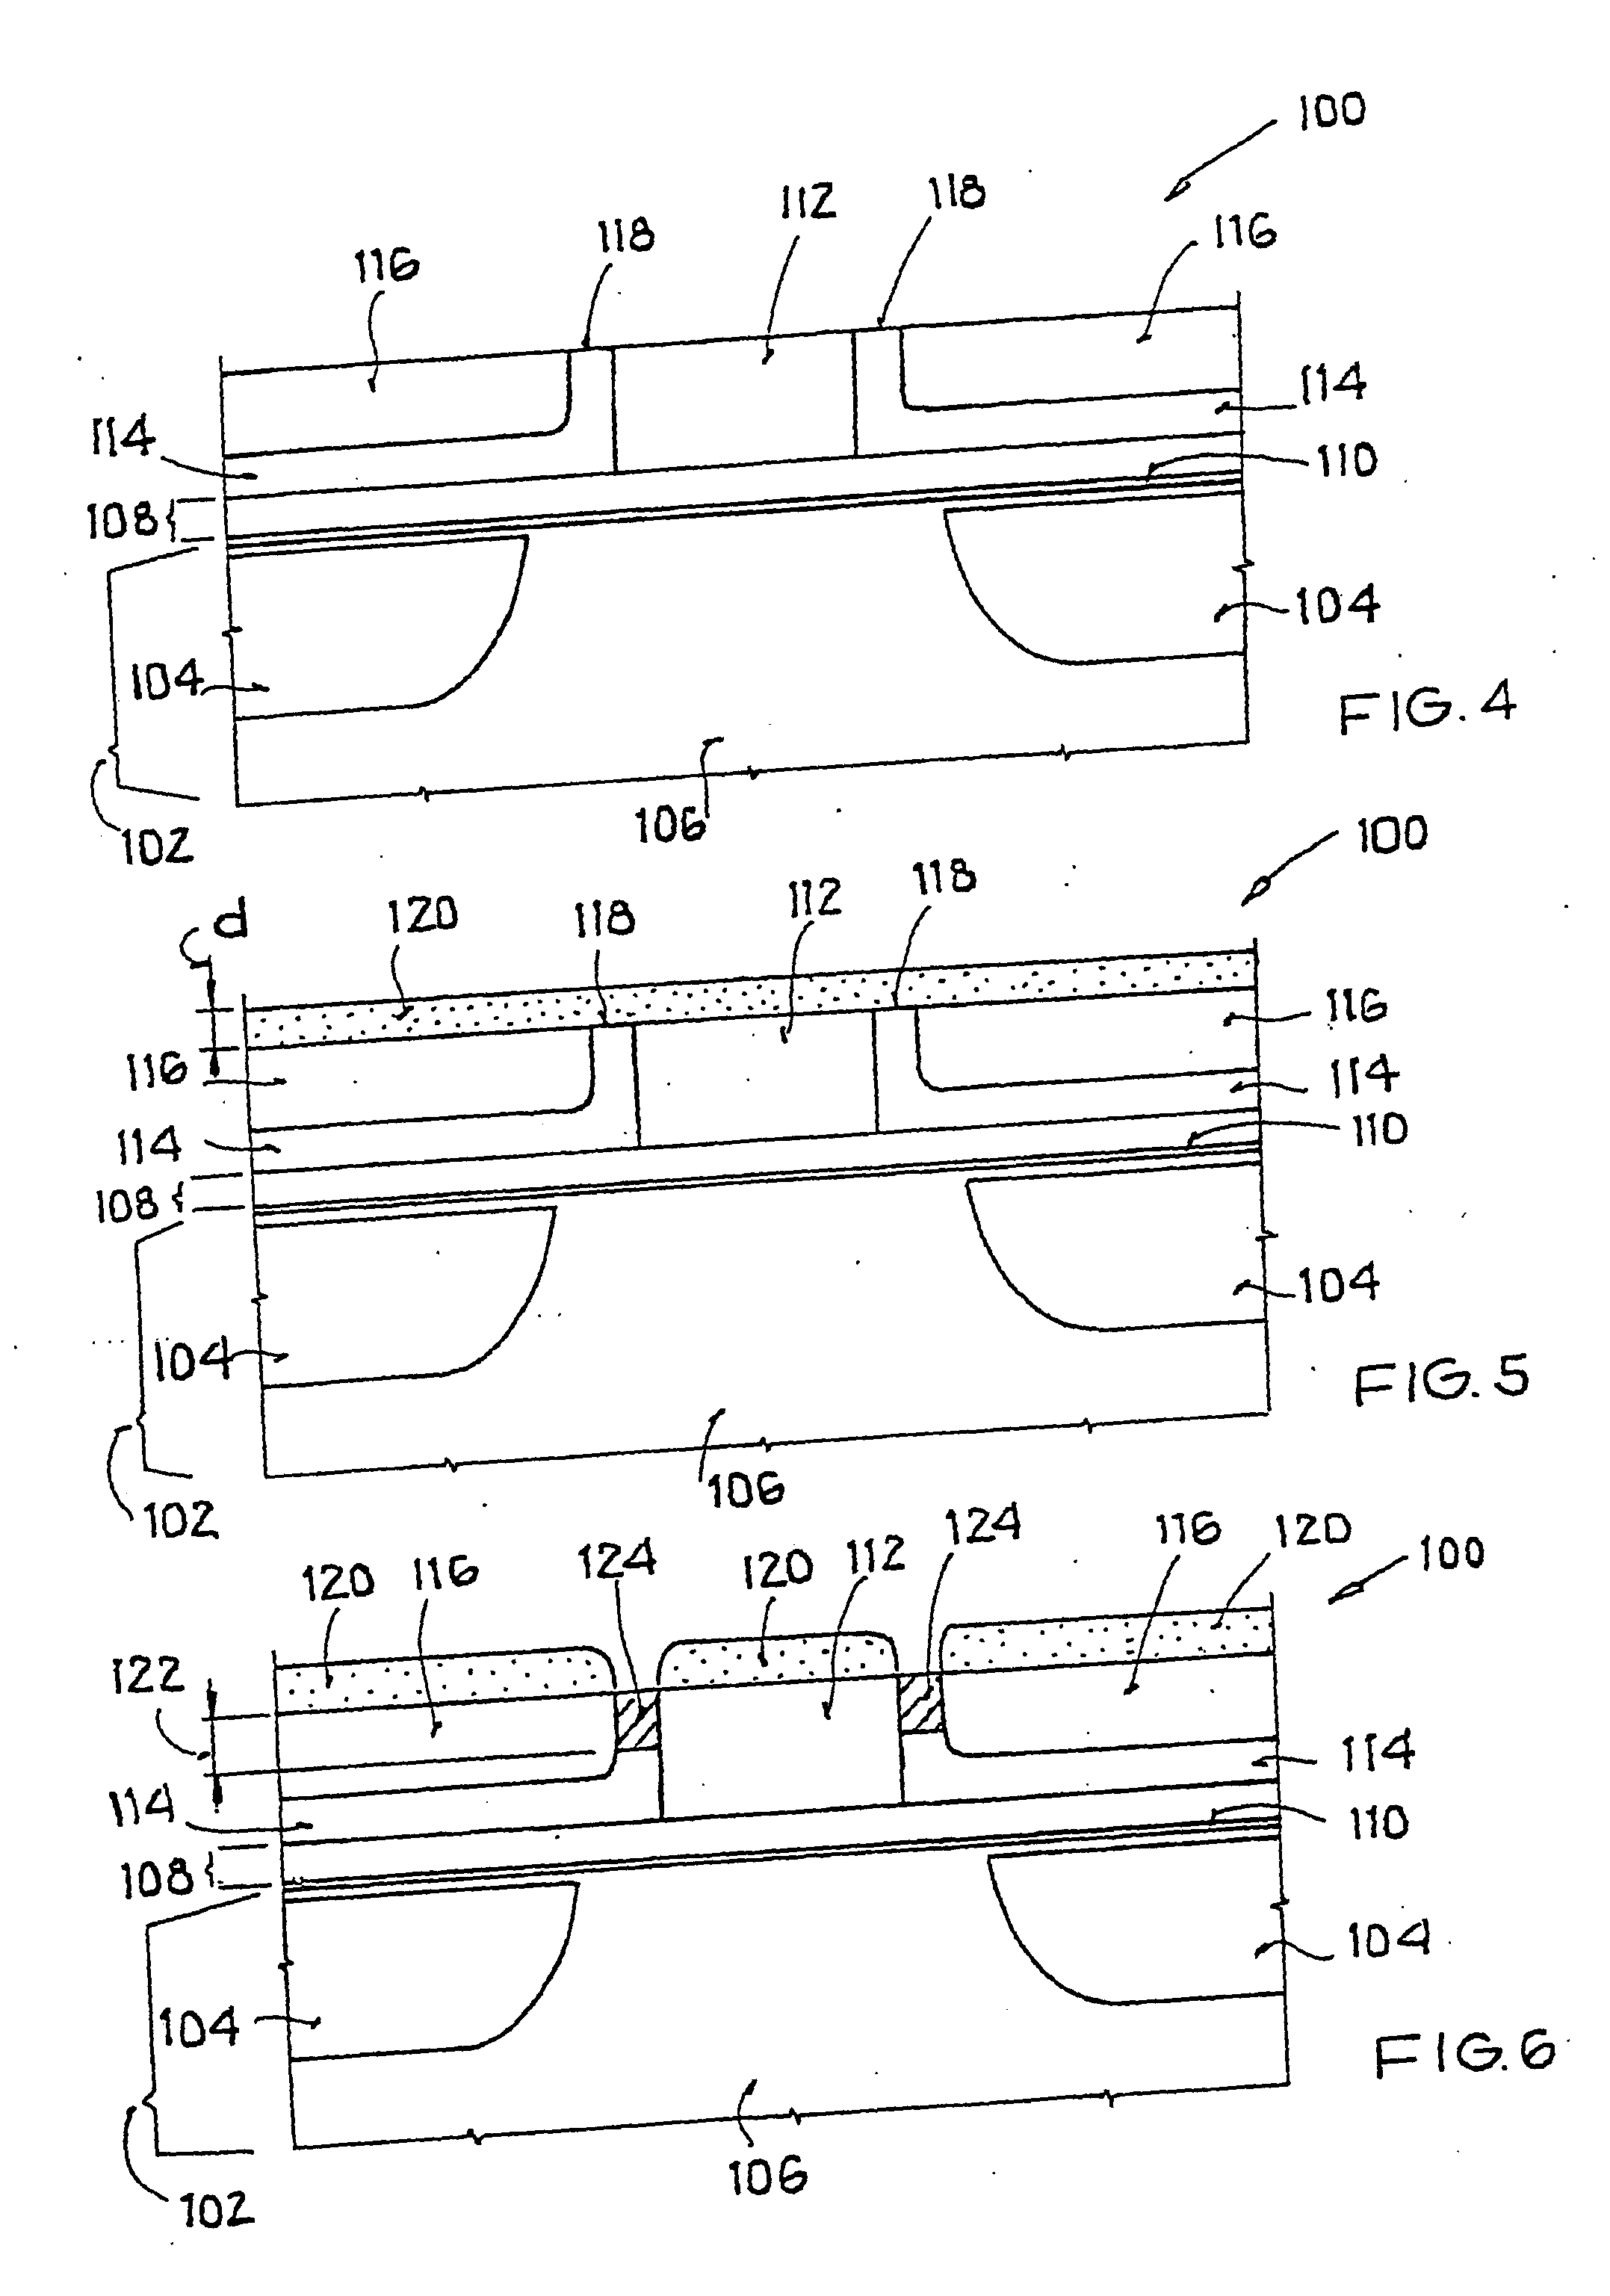 Process for producing a base connection of a bipolar transistor